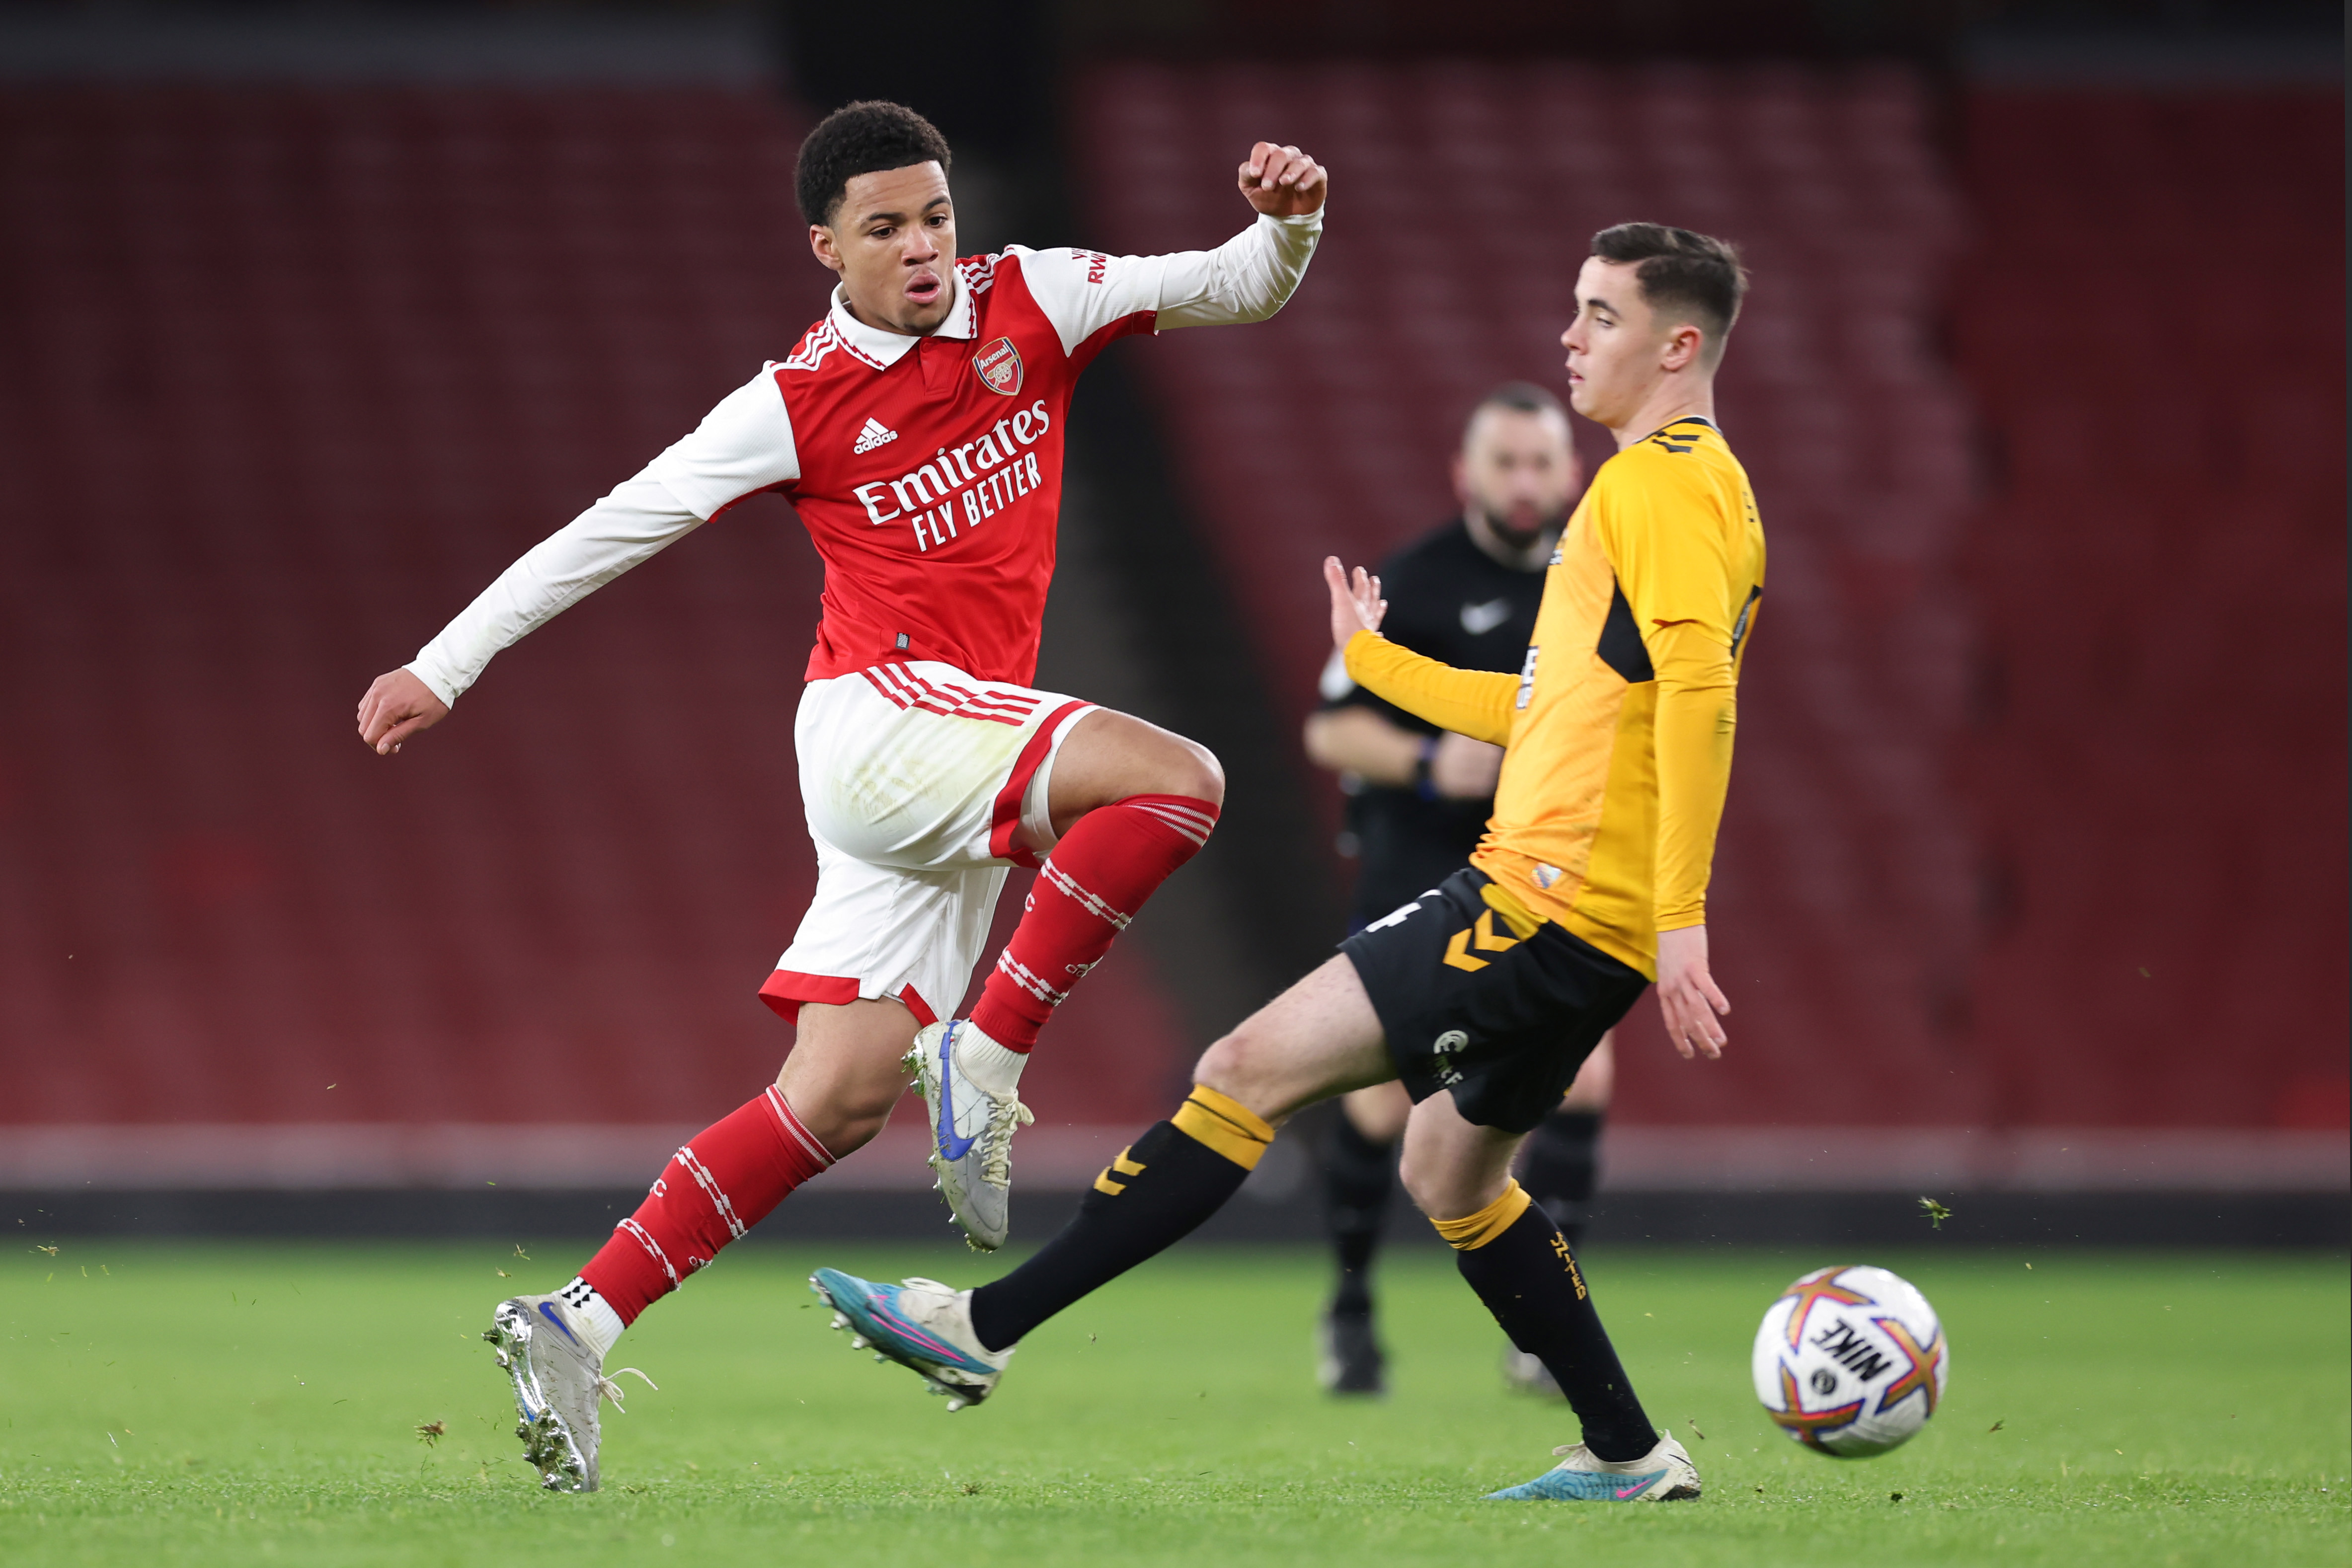 FA Youth Cup semi-final: Arsenal U18 v Manchester City U18 - All you need to know about ticket info, date & kick off 